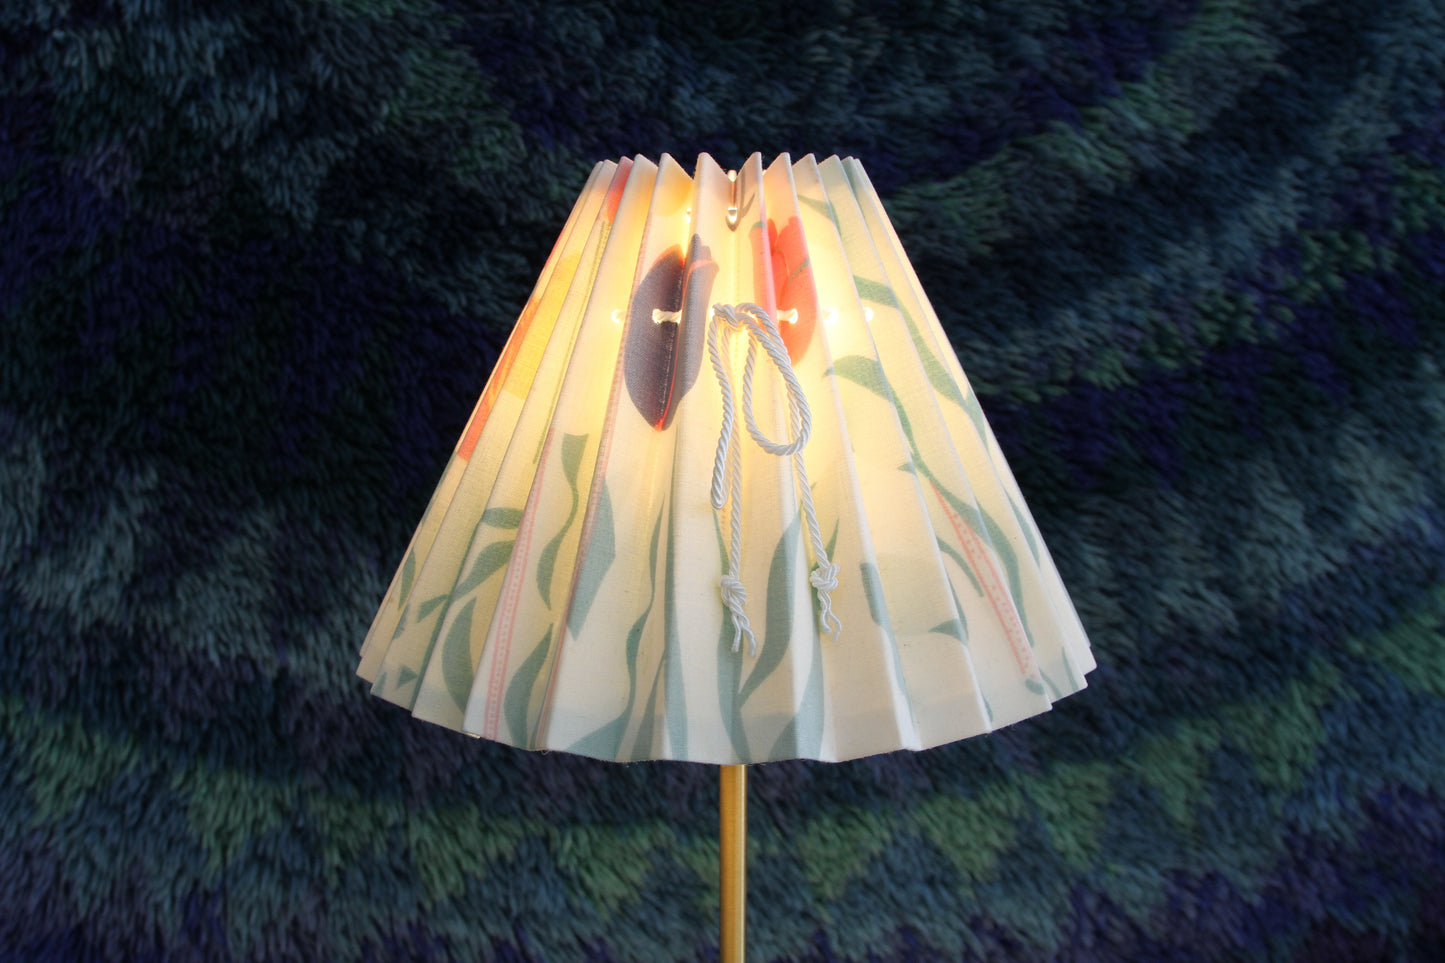 SOLD Josef Frank Brass "Dressing Lamp" with Floral Printed Shade